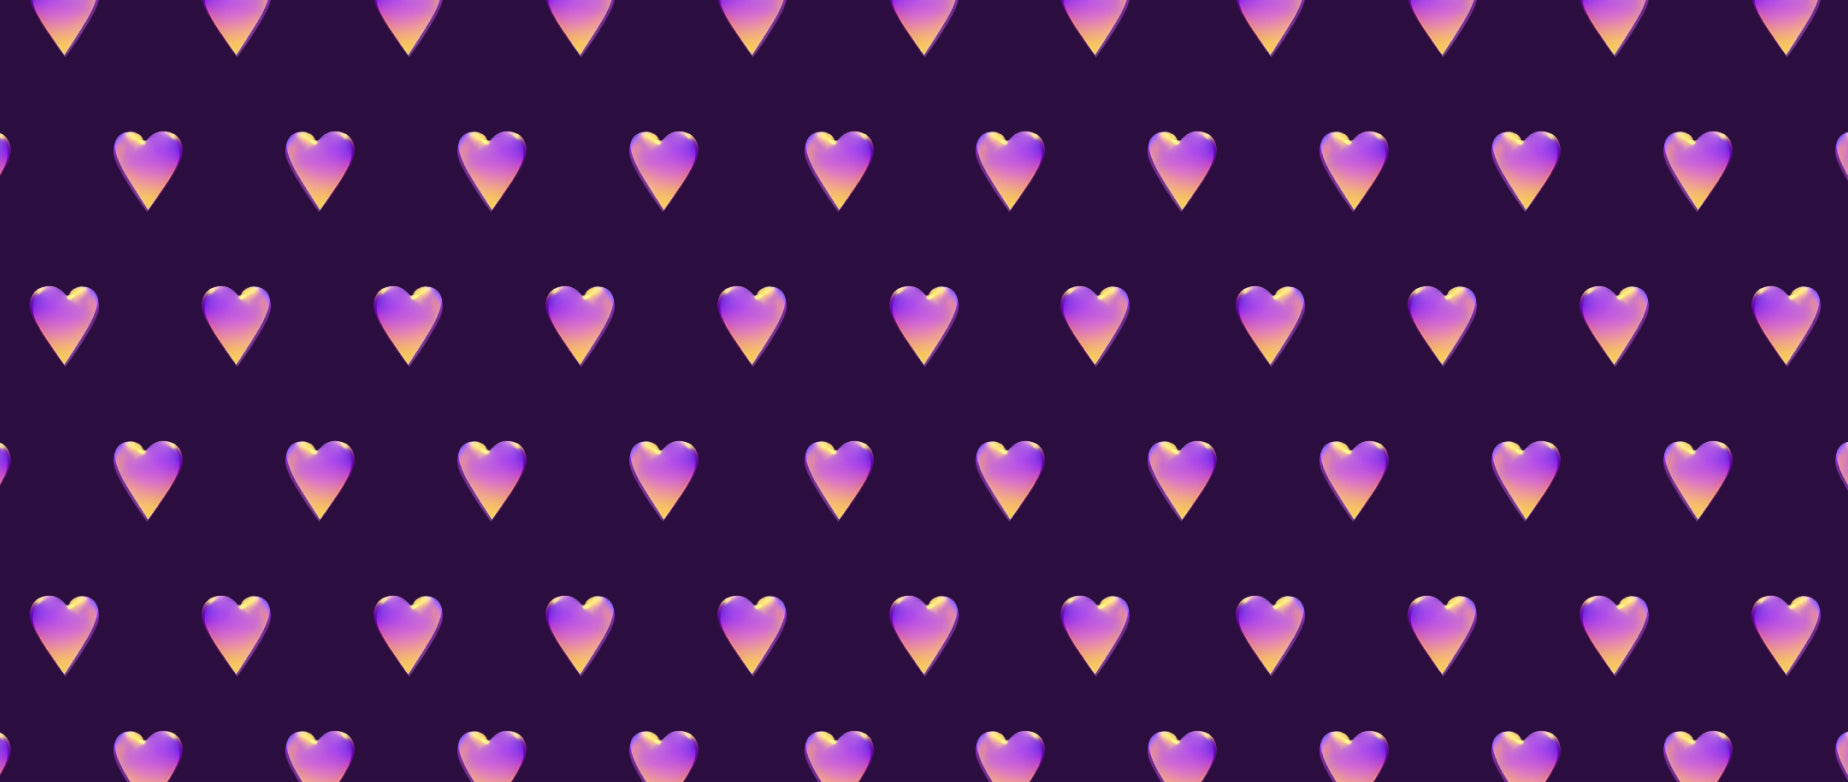 pink hearts against a purple background: social media marketing